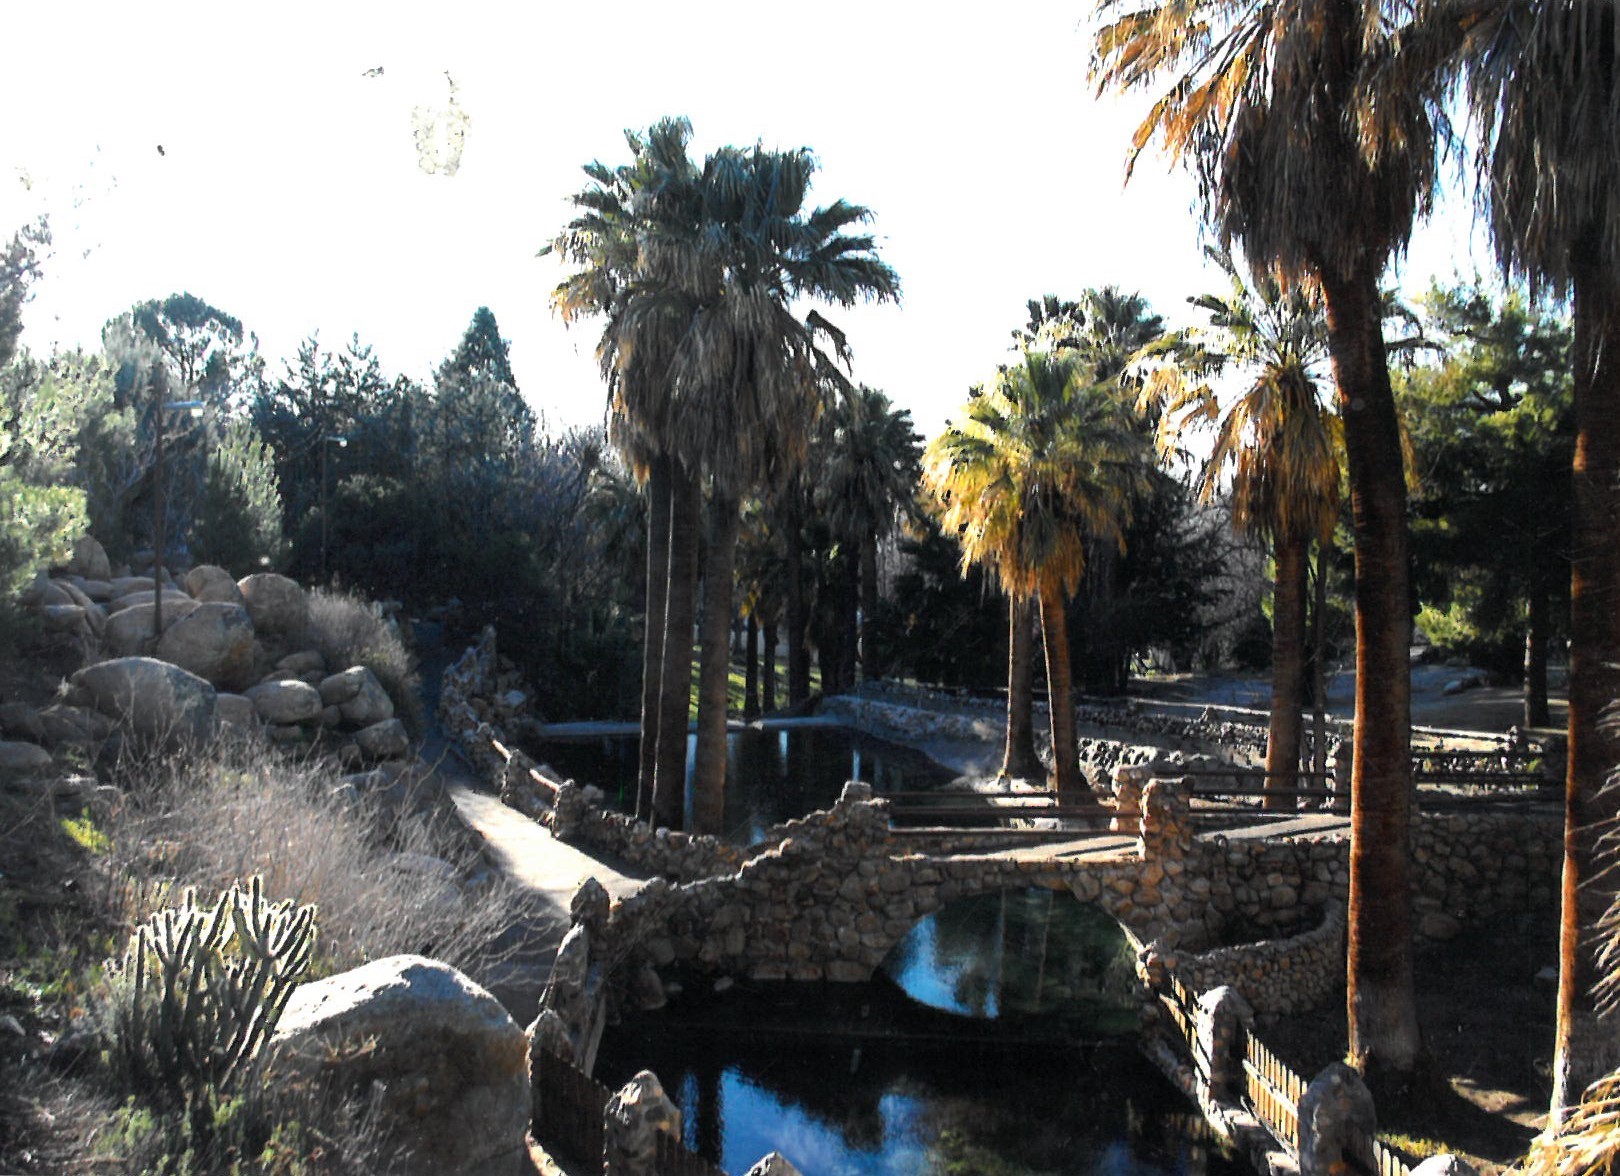 Color photograph of desert resort landscape with palm trees, stone walkways and water feature